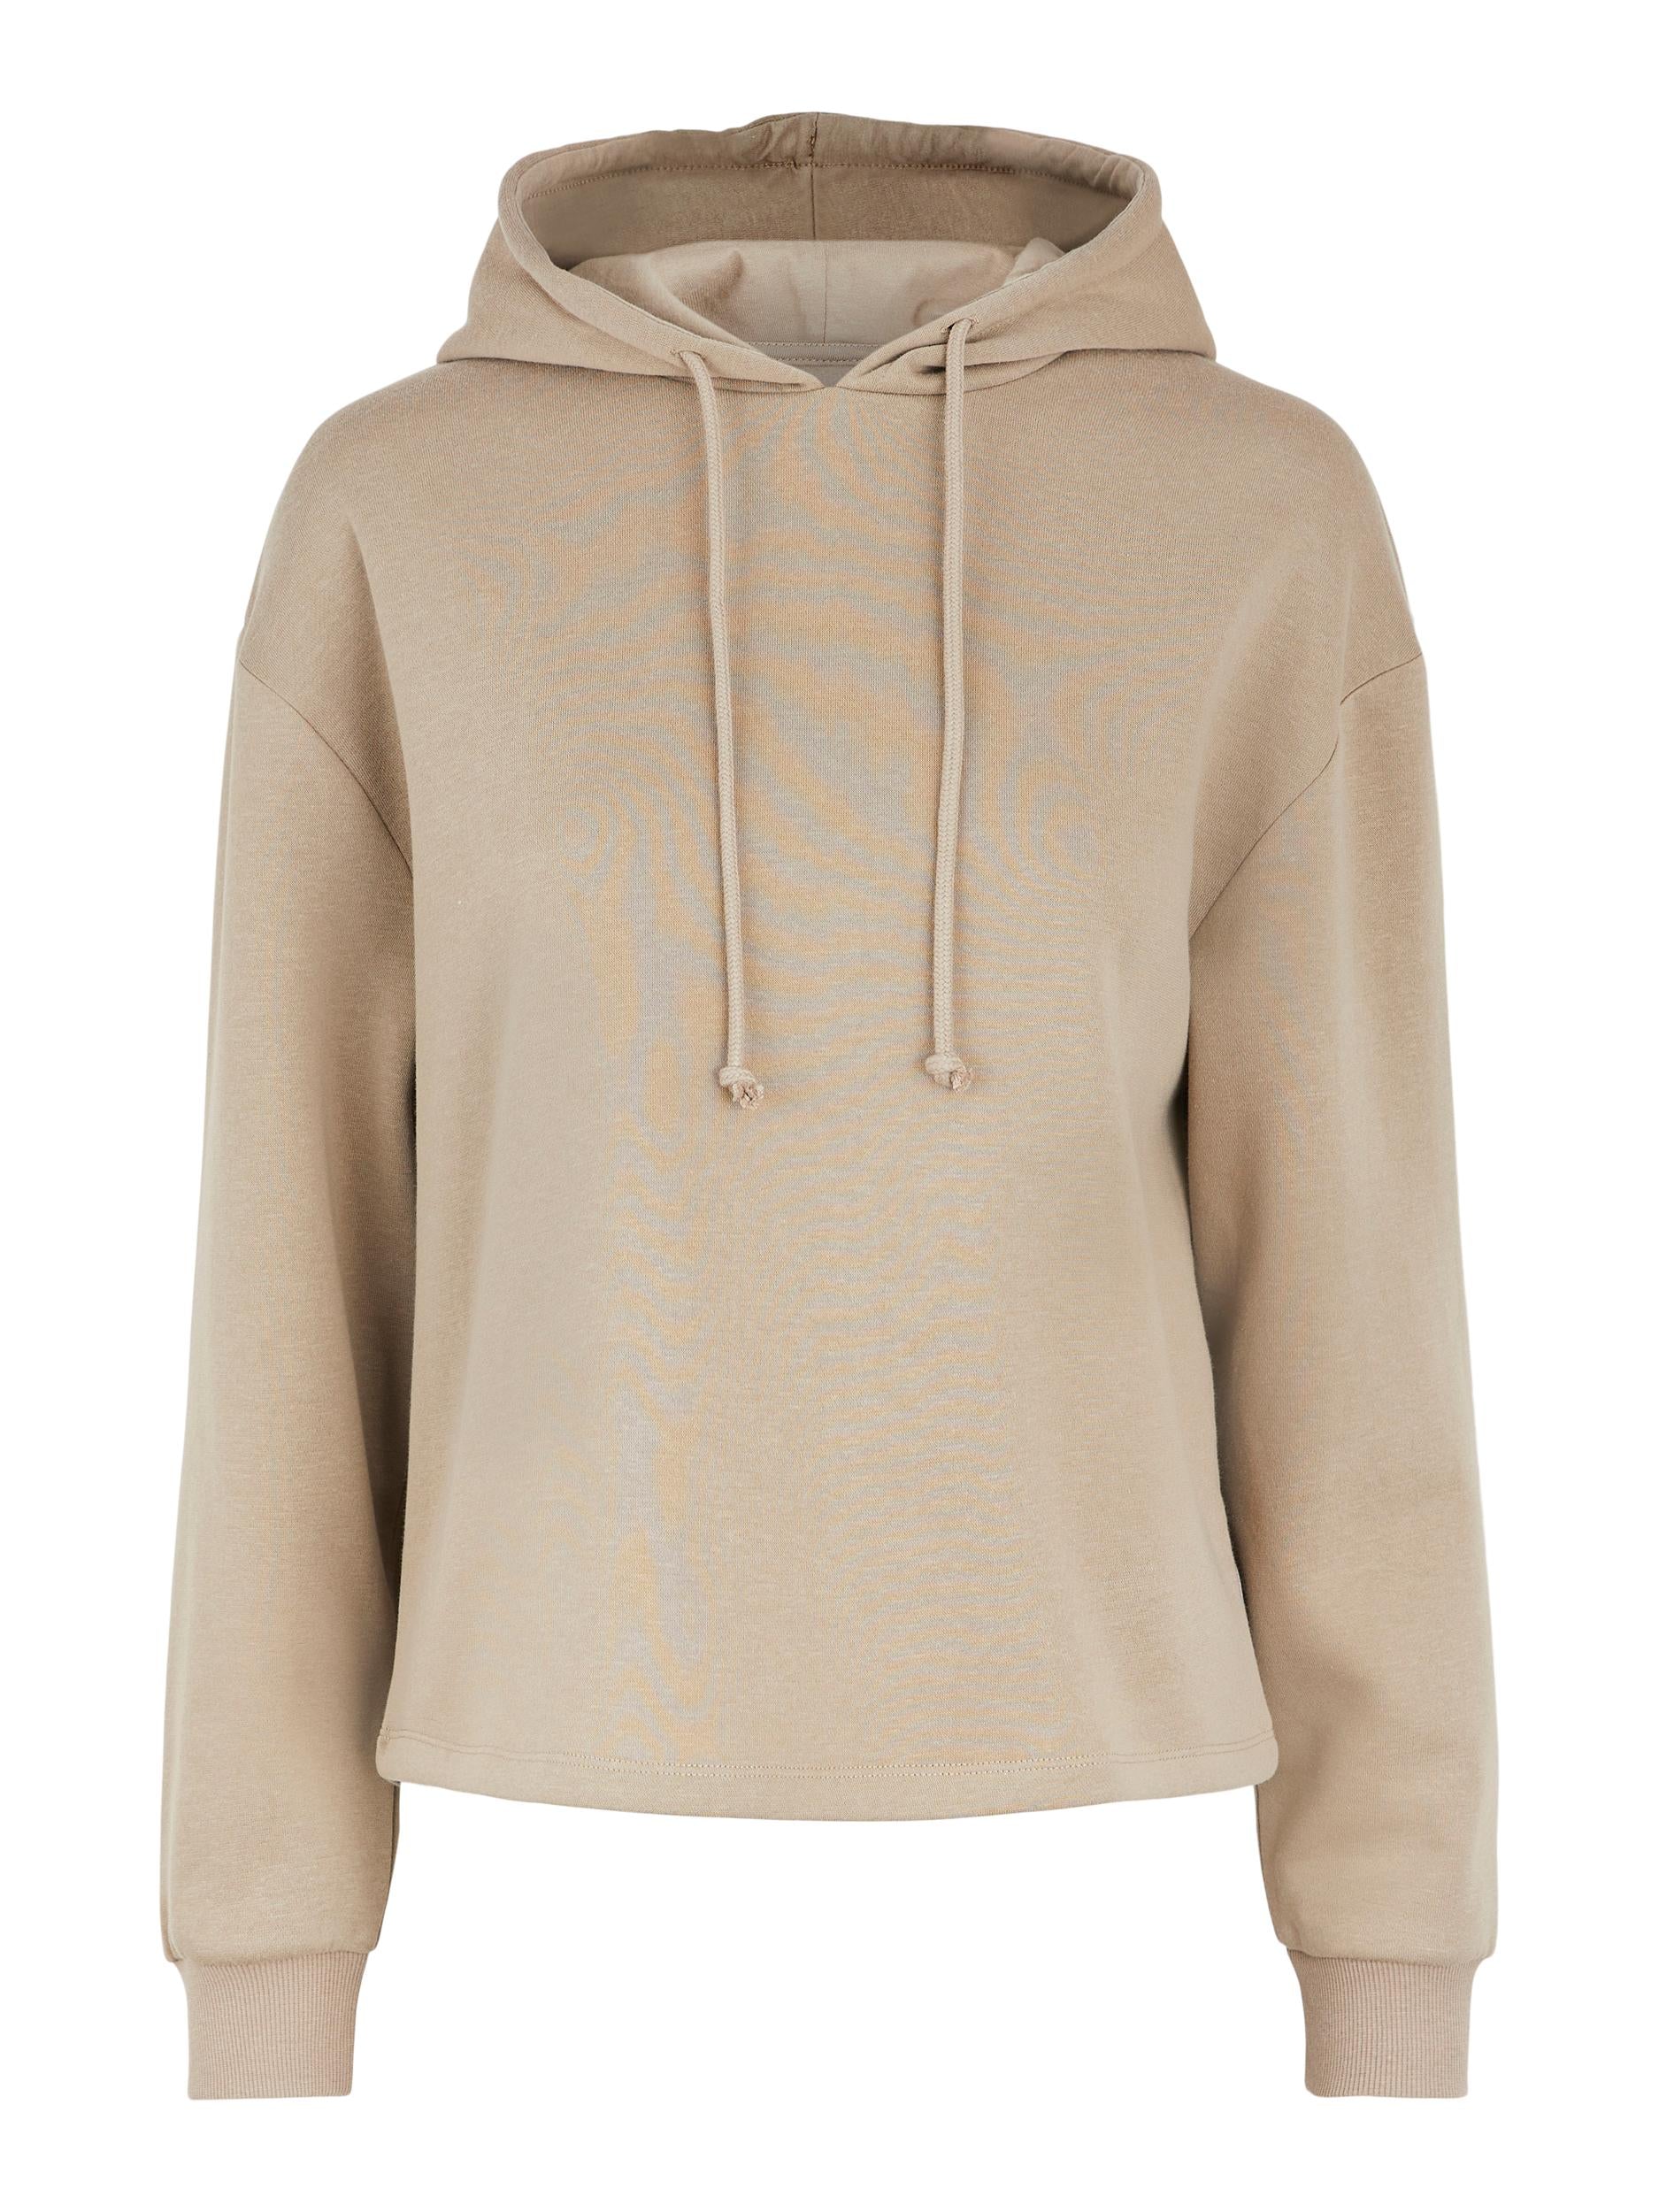 Pieces Chilli Hoodie- sand